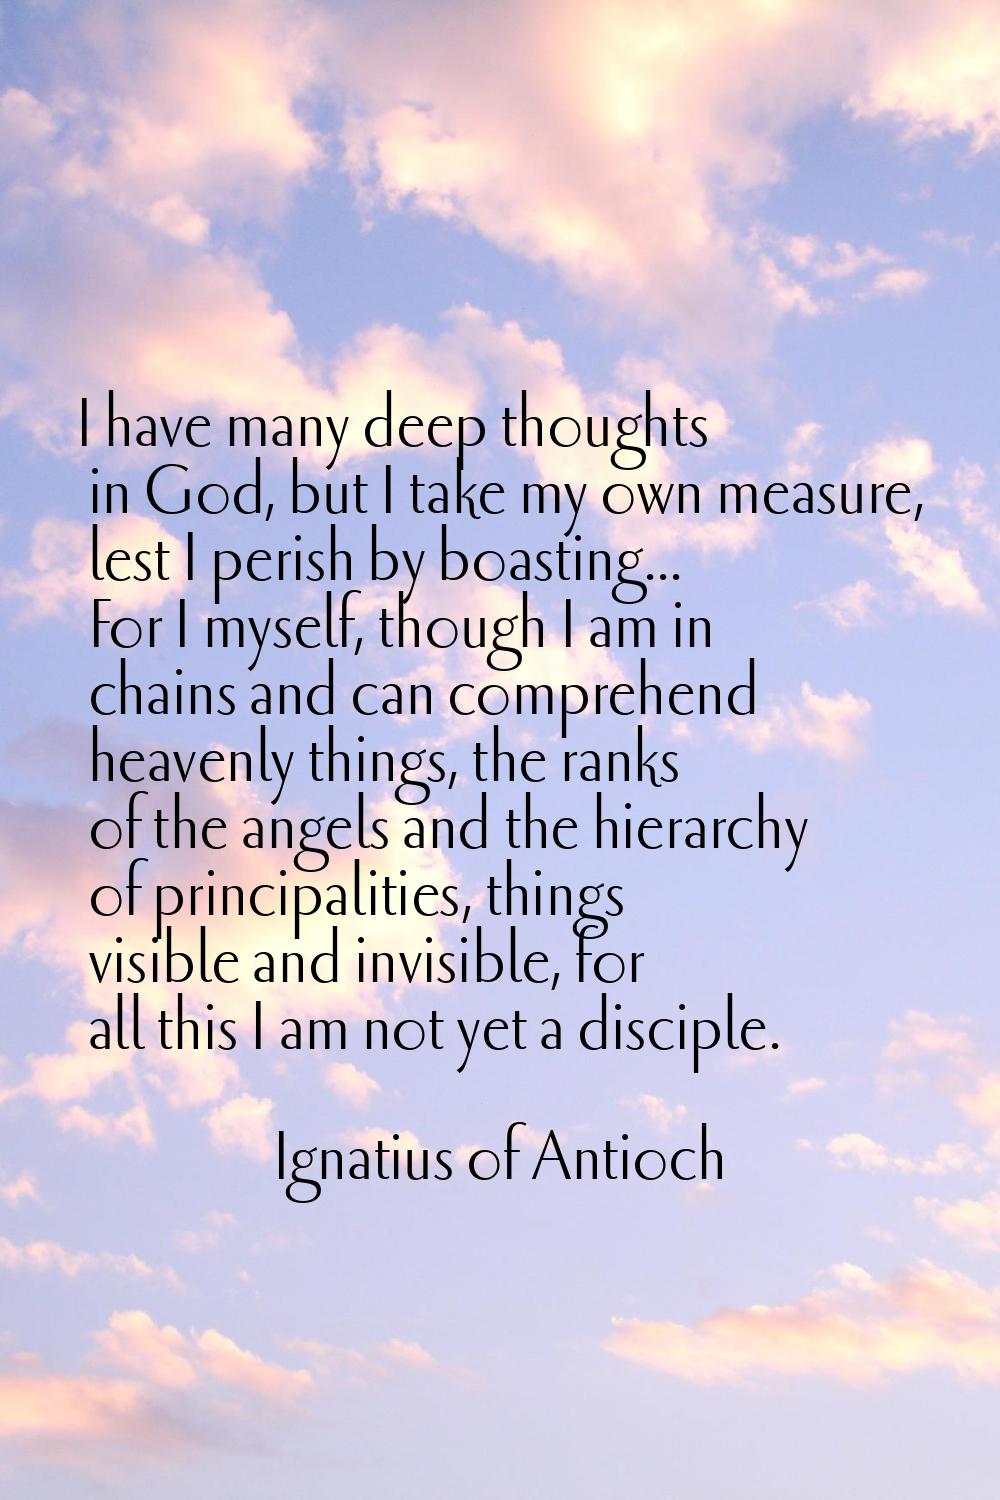 I have many deep thoughts in God, but I take my own measure, lest I perish by boasting... For I mys